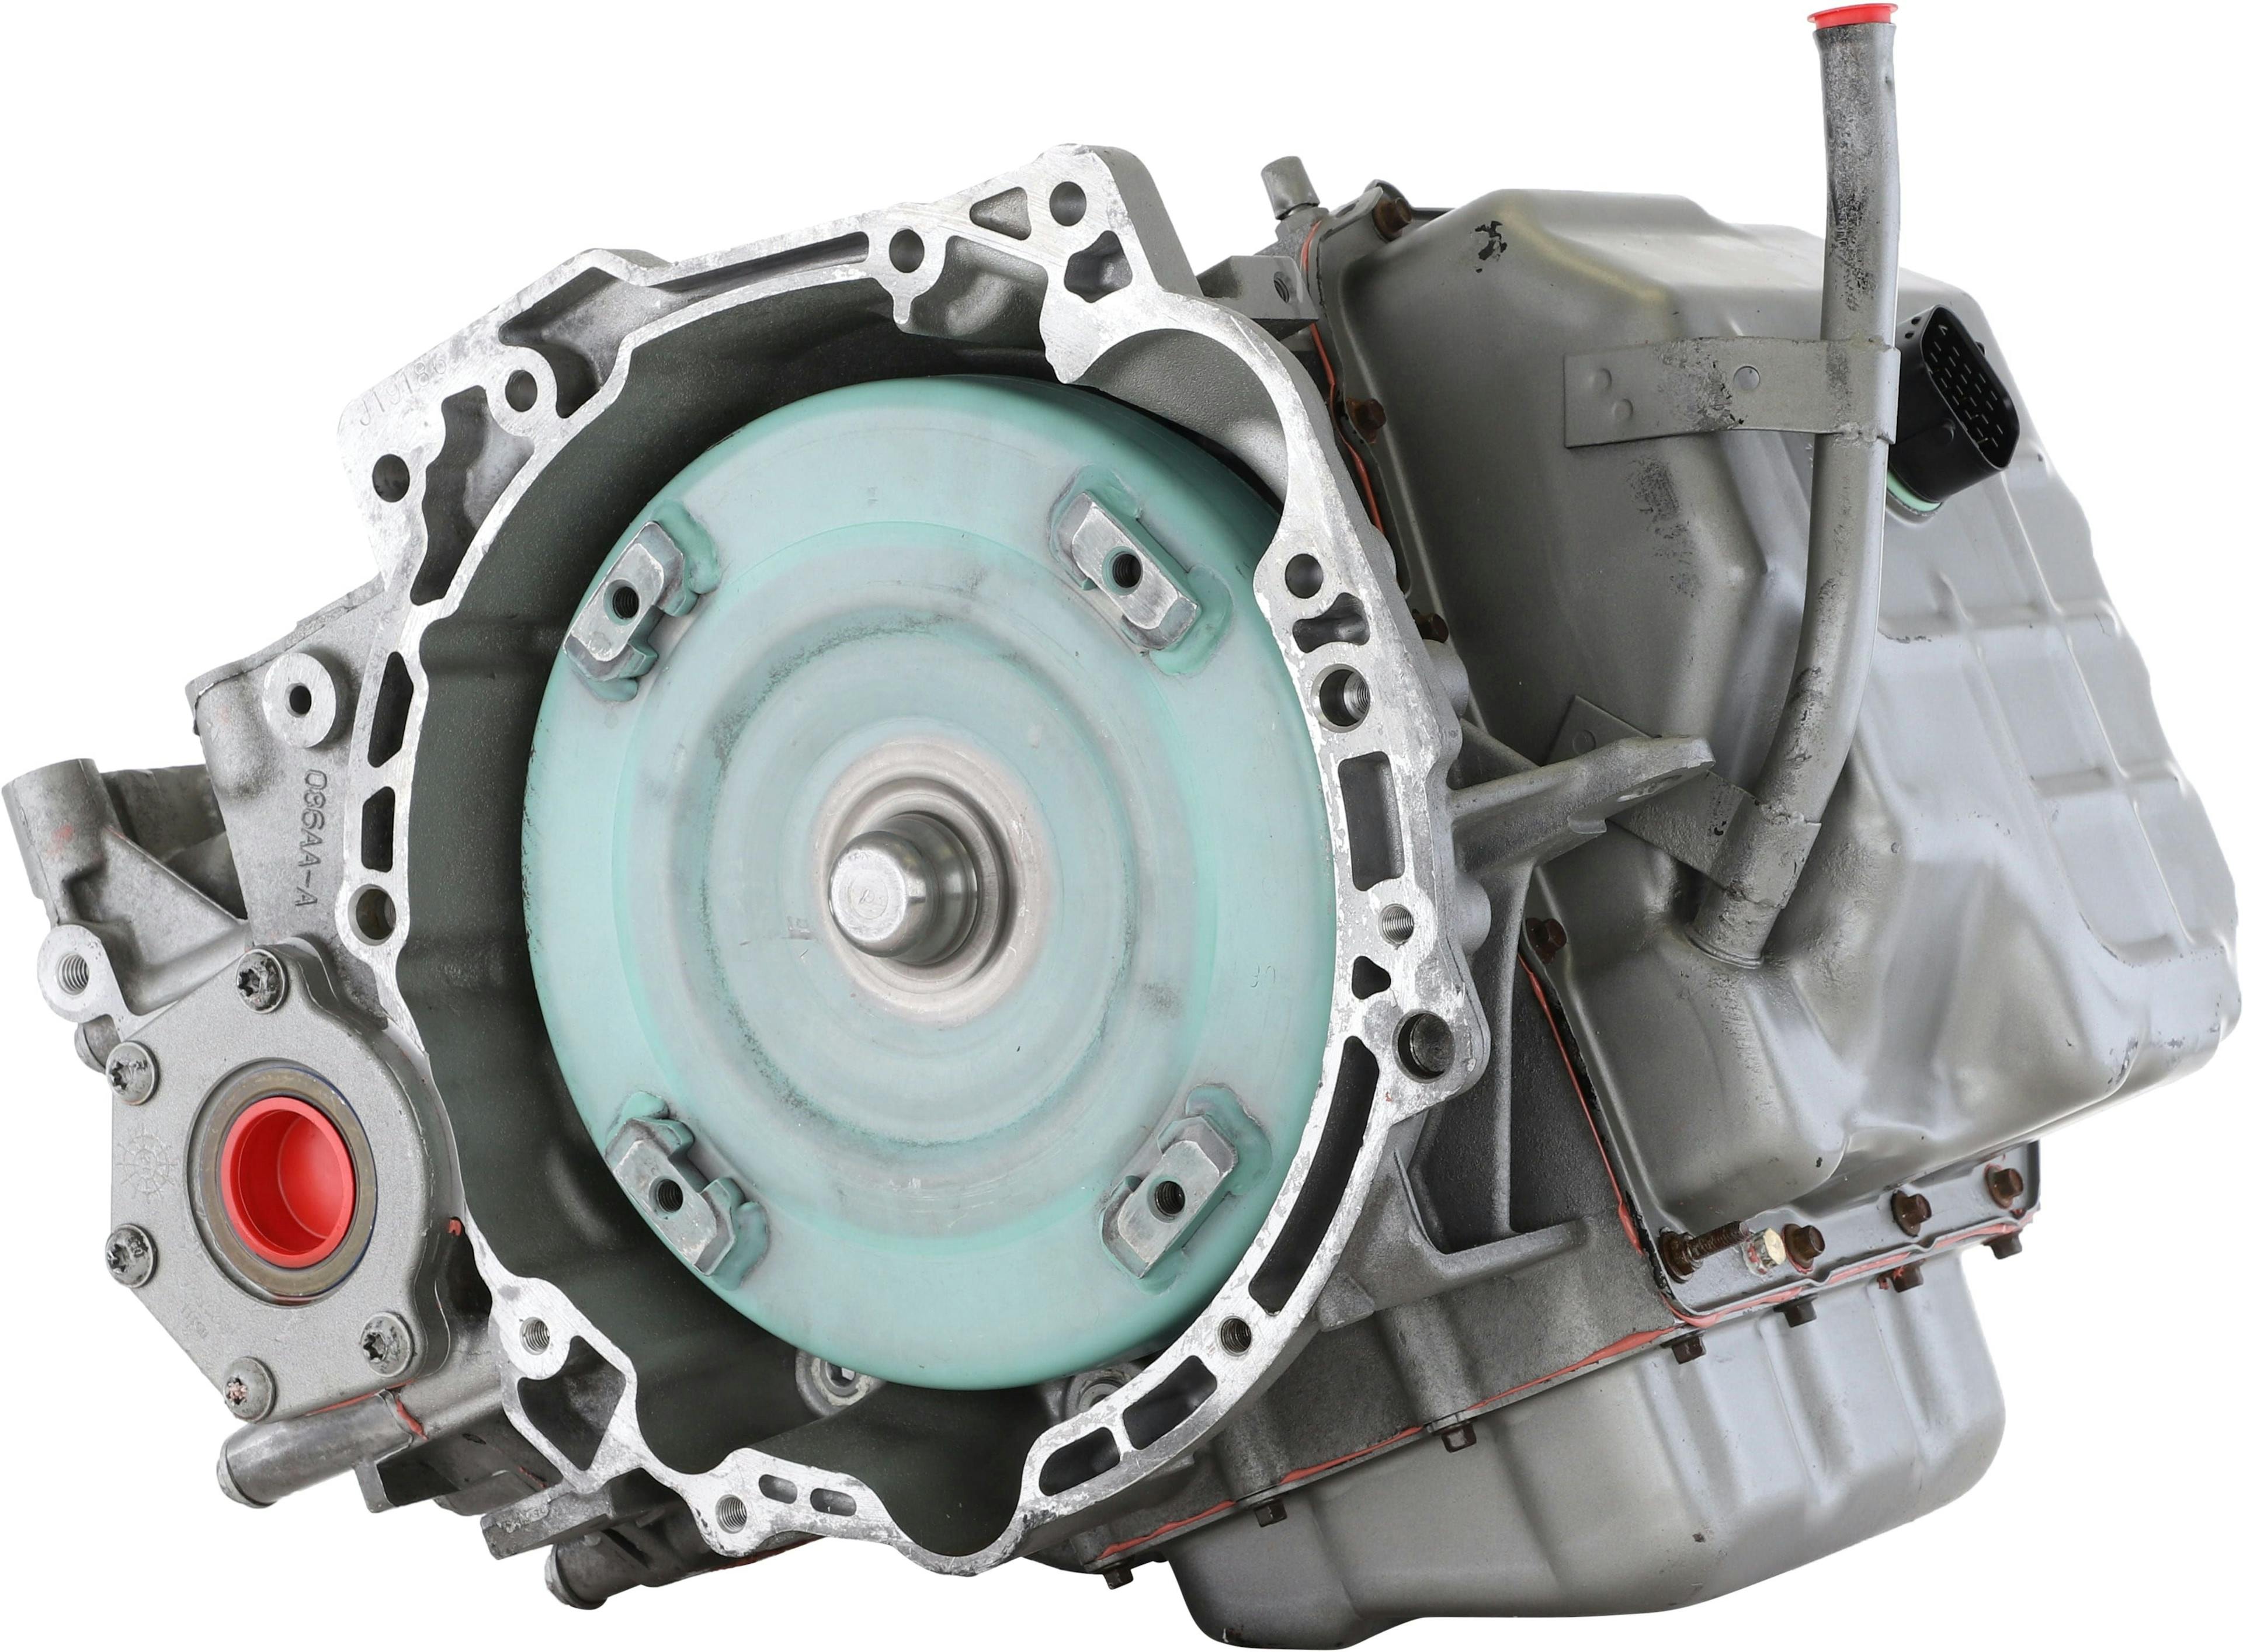 Automatic Transmission for 2011-2012 Chrysler 200/Dodge Avenger FWD with 2.4L Inline-4 Engine